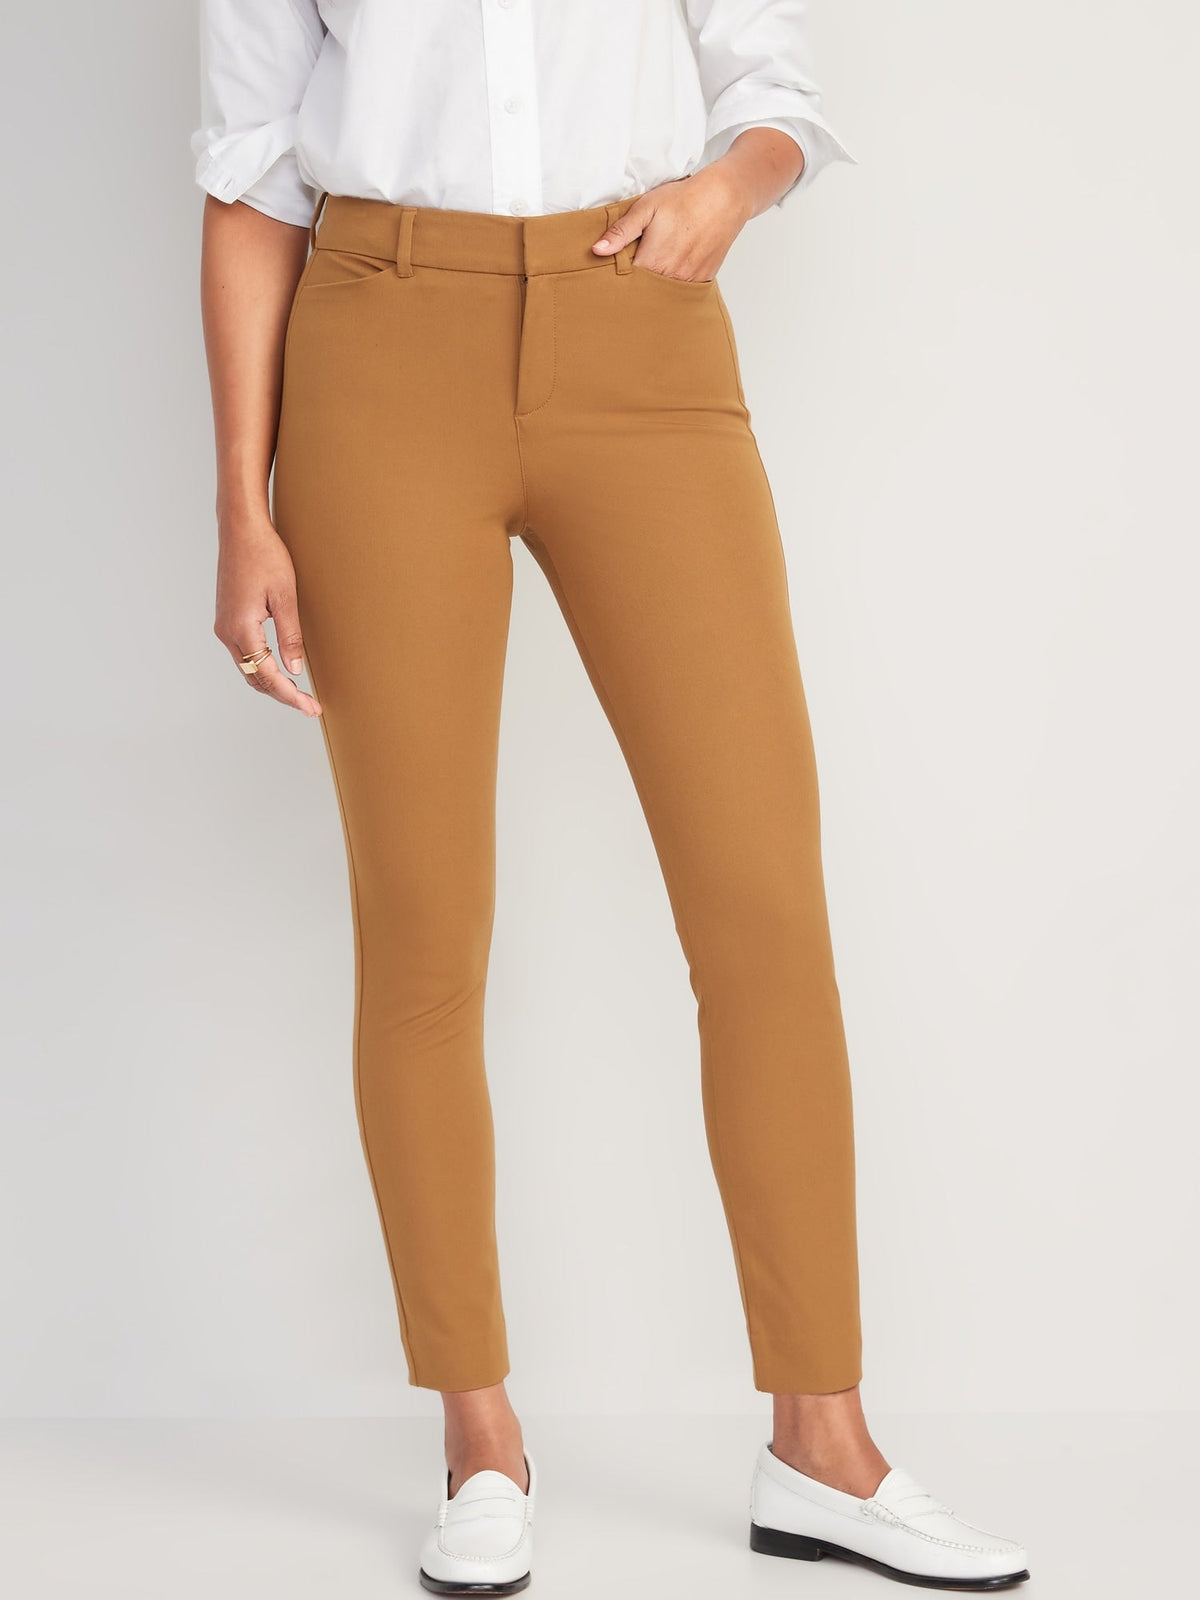 High-Waisted Never-Fade Pixie Skinny Ankle Pants for Women - Old Navy  Philippines